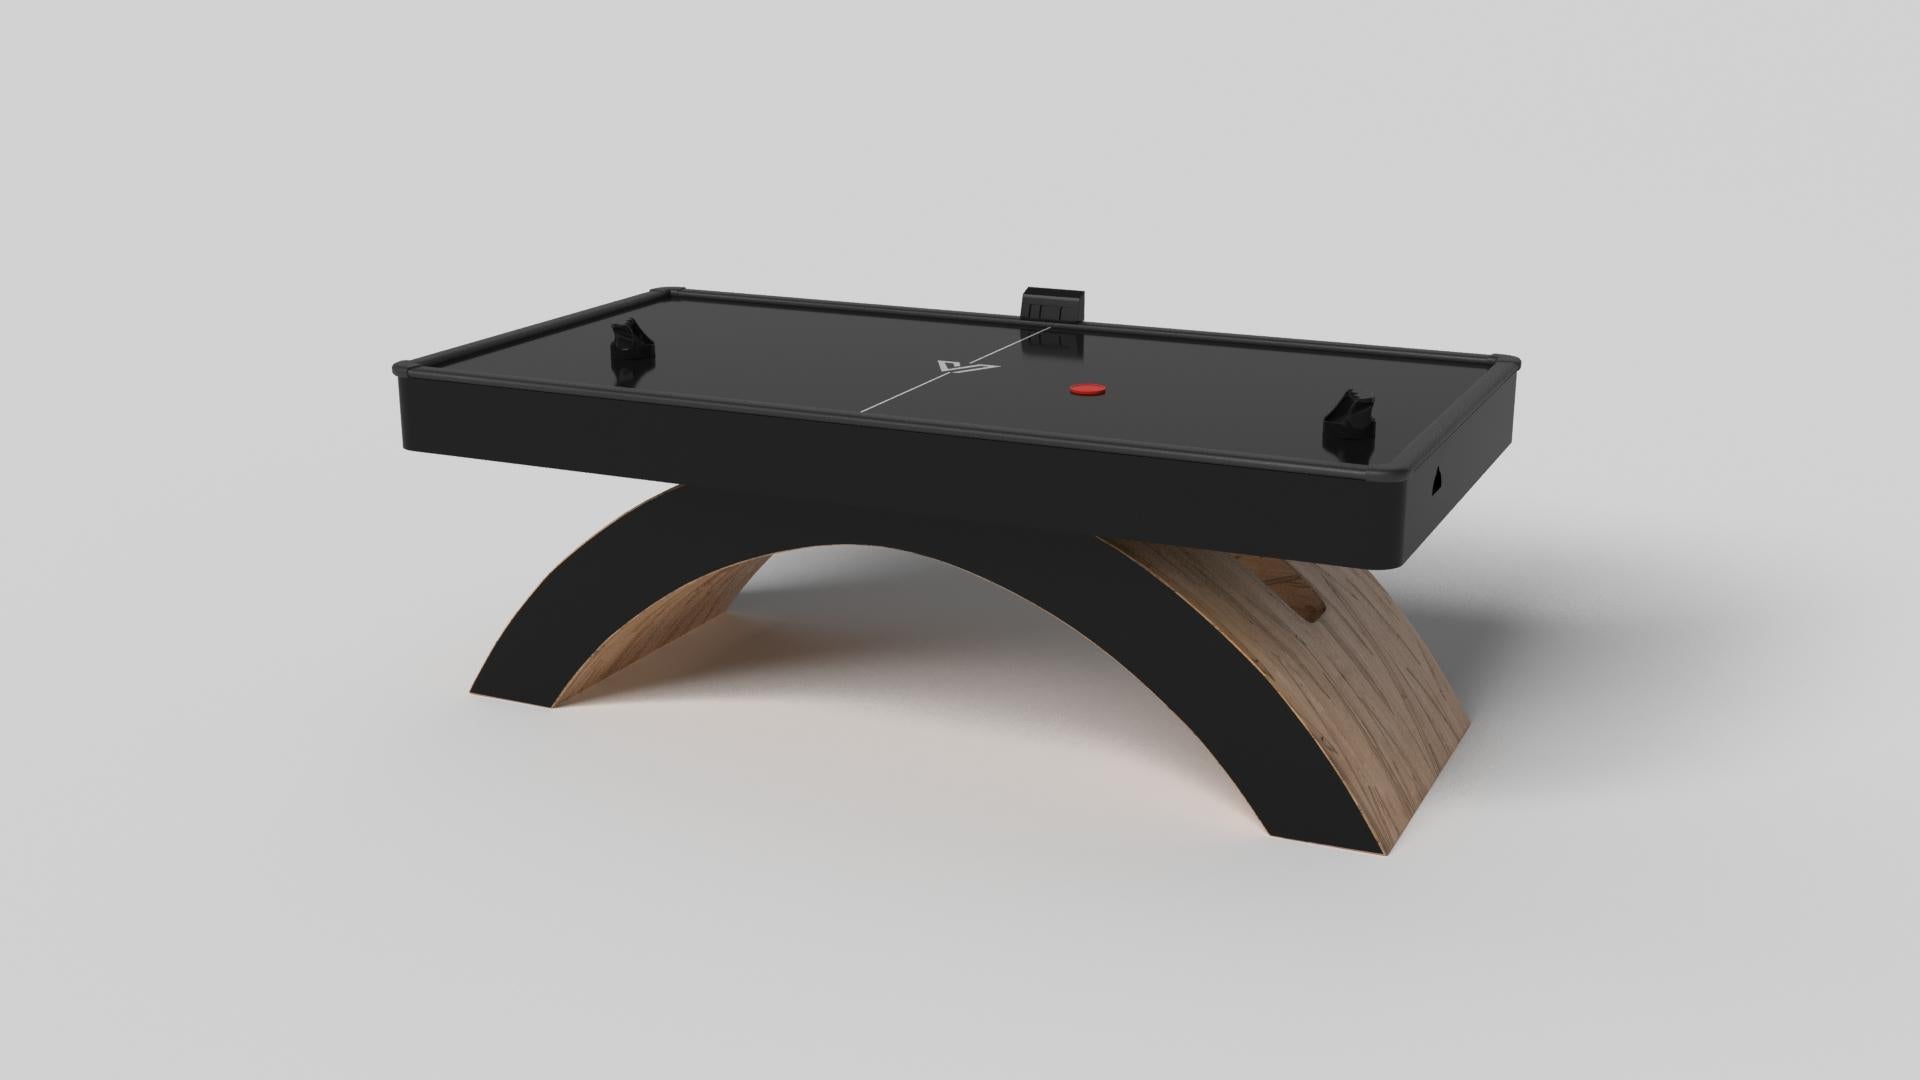 An open, arched base balances beautifully against the hard edges of the rectangular surface top, making the Zenith air hockey table in black with red a striking juxtaposition of modern, geometric forms. Minimalist in its appeal yet luxurious in